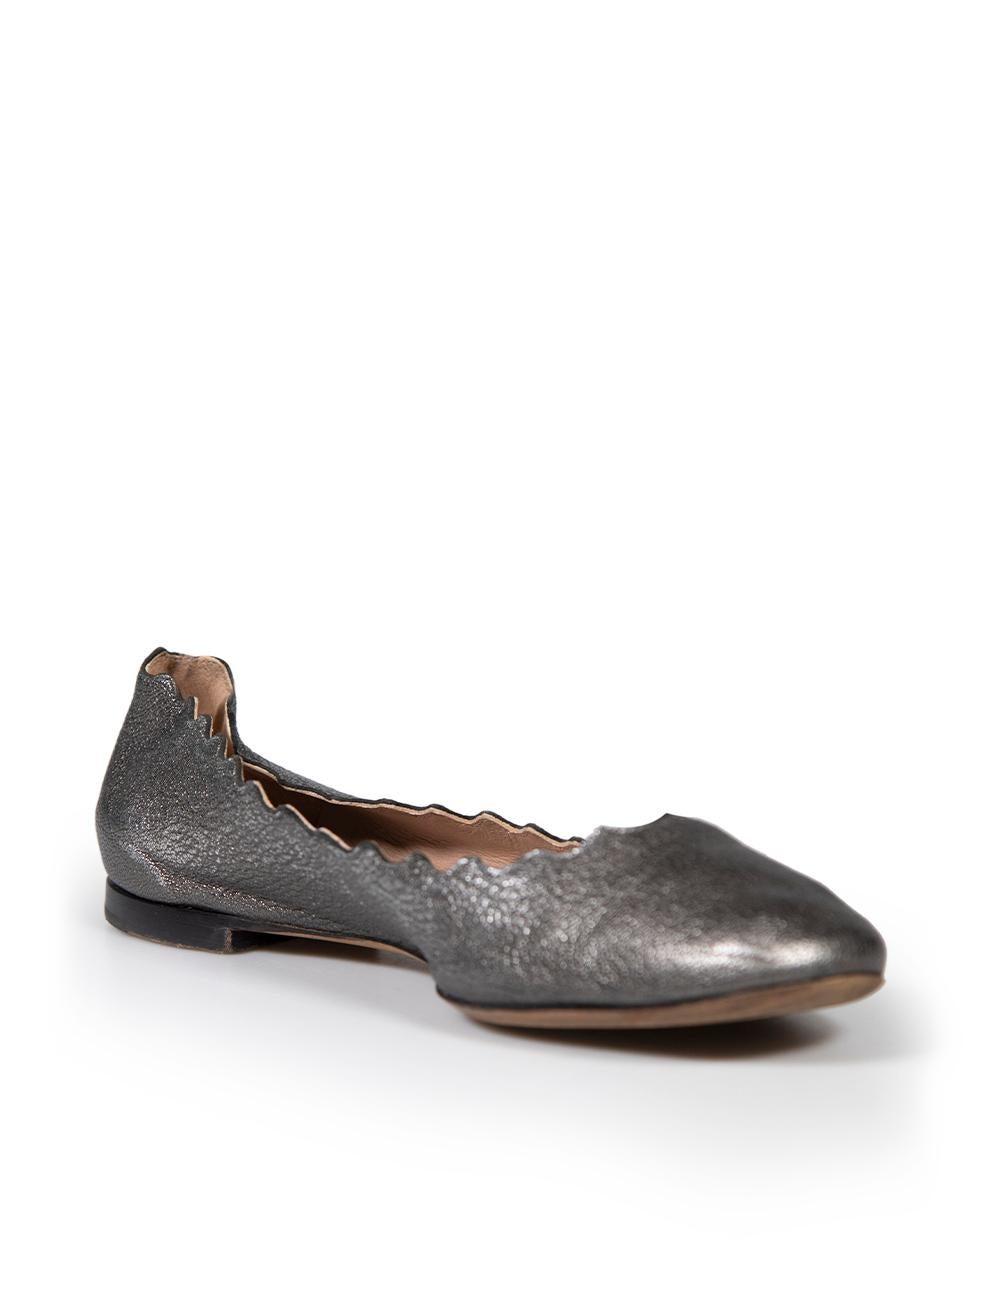 CONDITION is Good. Minor wear to flats is evident. Light wear with general creasing to the leather and wear to the soles on this used Chloé designer resale item.
 
 
 
 Details
 
 
 Silver
 
 Leather
 
 Flats
 
 Round toe
 
 Scalloped edge
 
 
 
 
